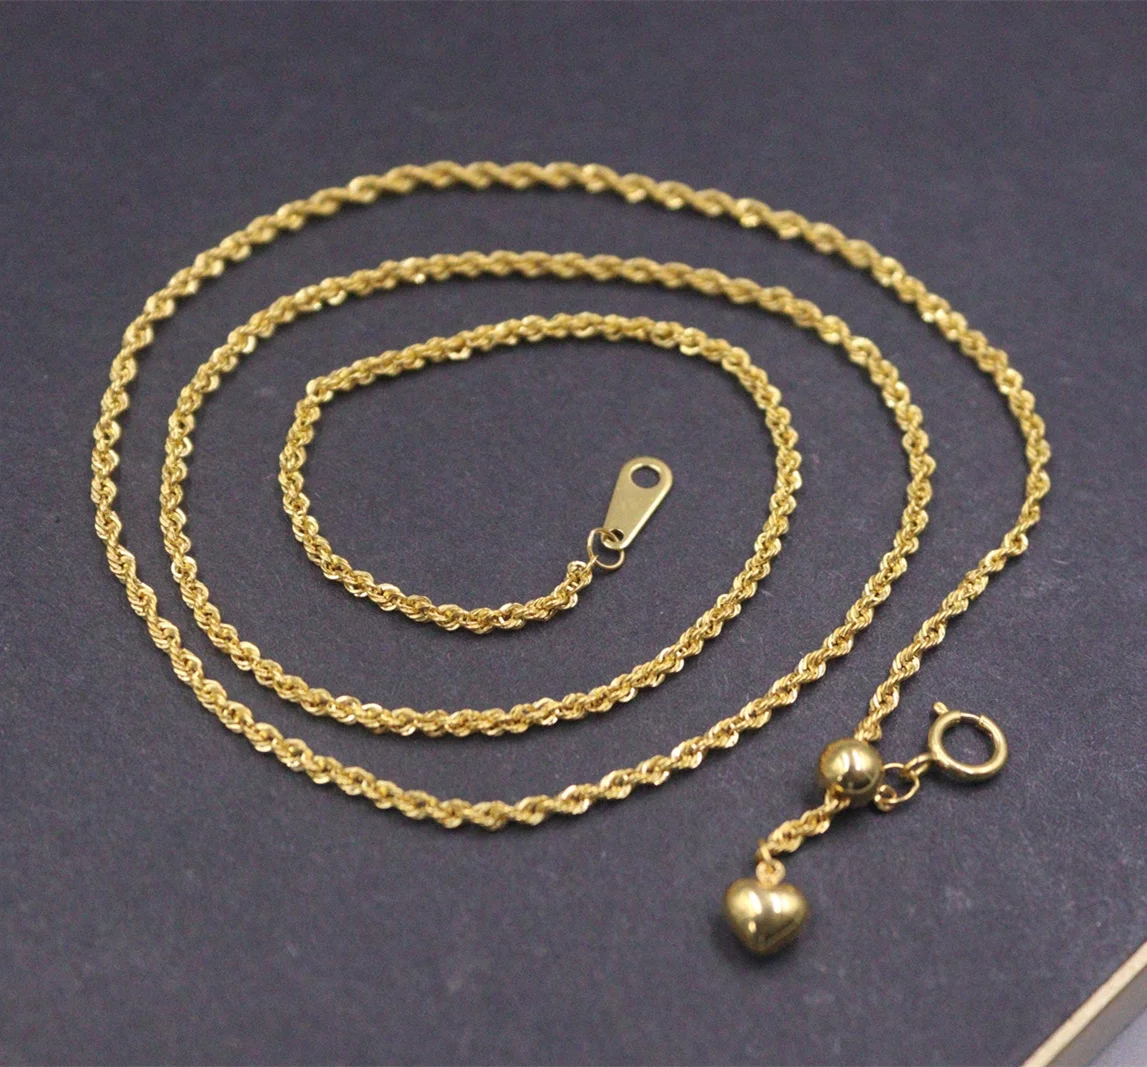 

Pure Au750 18K Yellow Gold Chain 1.8mm Adjust Rope Link Necklace 1.7g 16.6inch